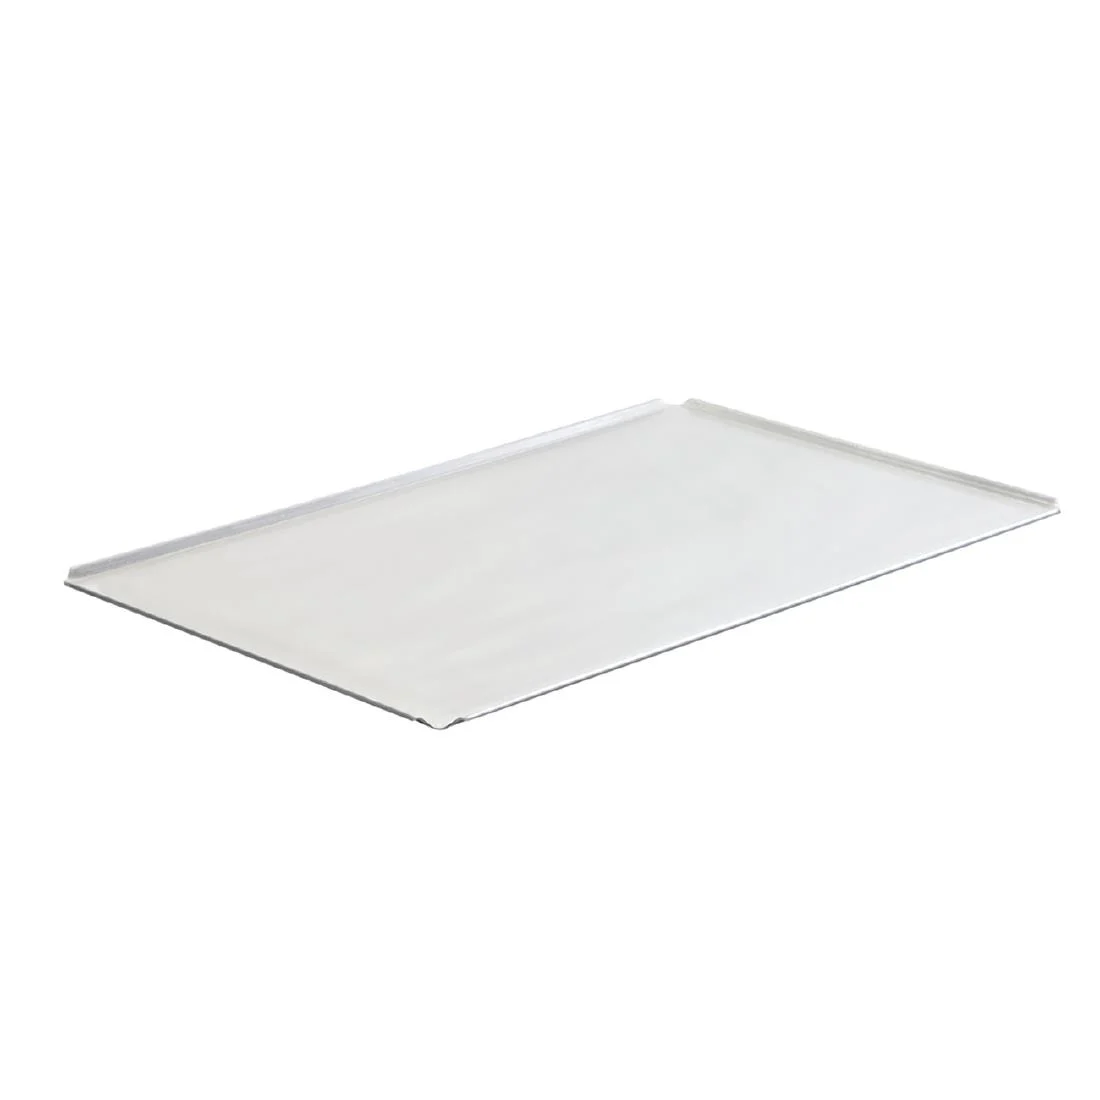 Baking Tray Aluminium Gastronorm / Patisserie 530 x 325mm GN1/1